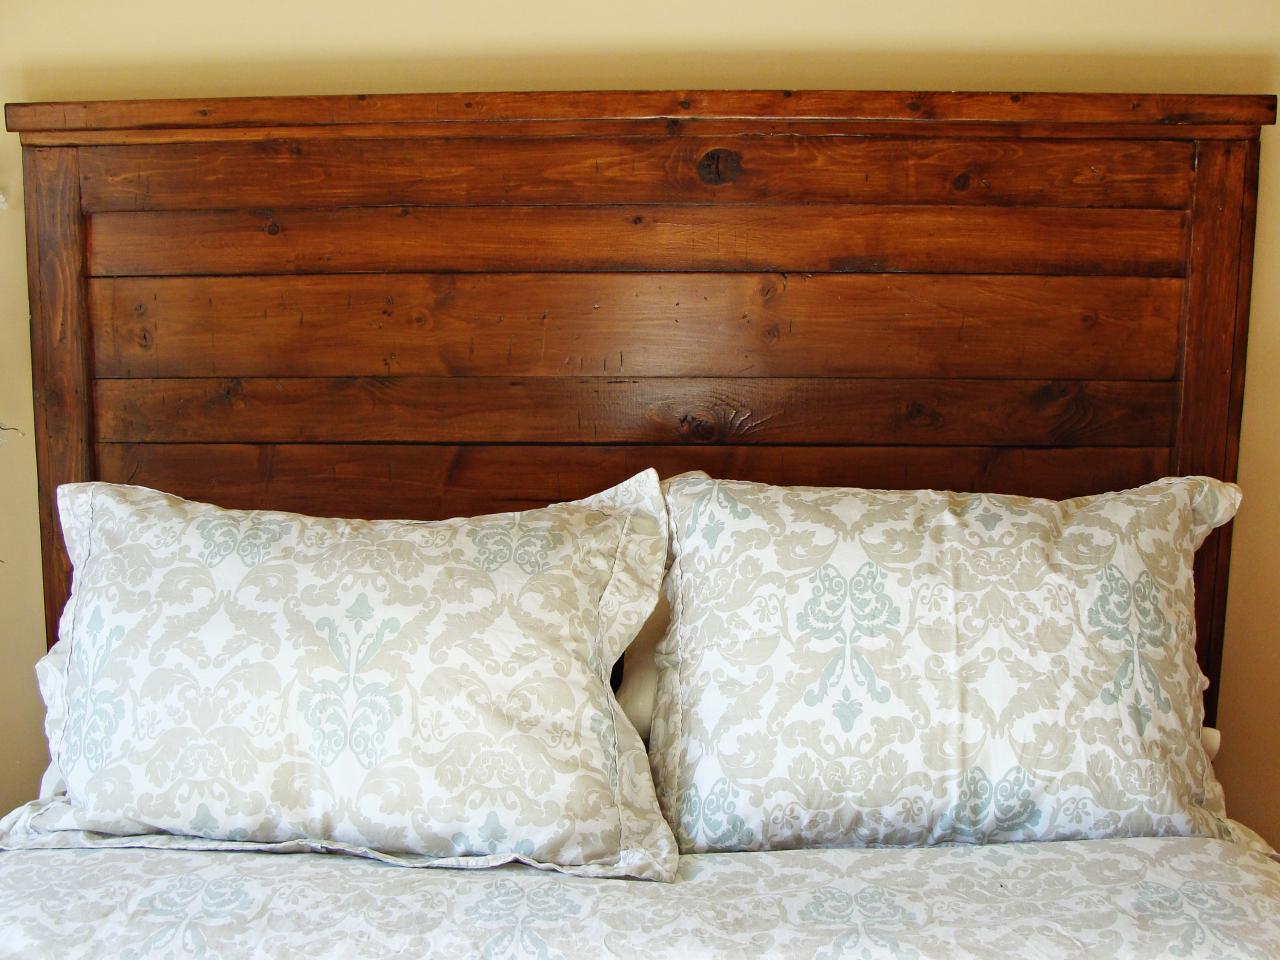 How To Build A Rustic Wood Headboard How Tos Diy